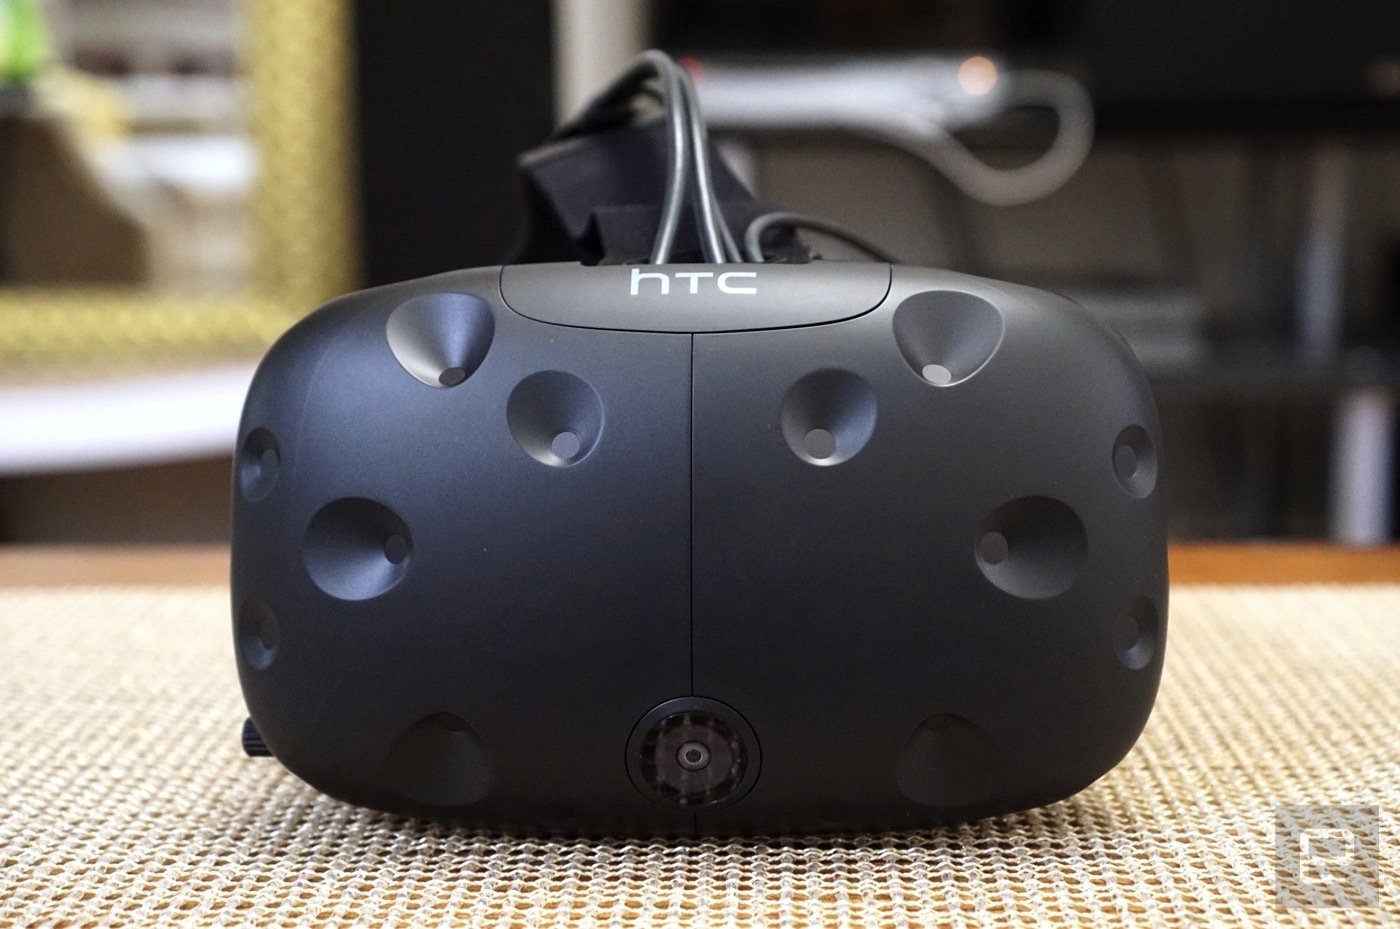 You can buy the Vive at brick and mortar stores this summer